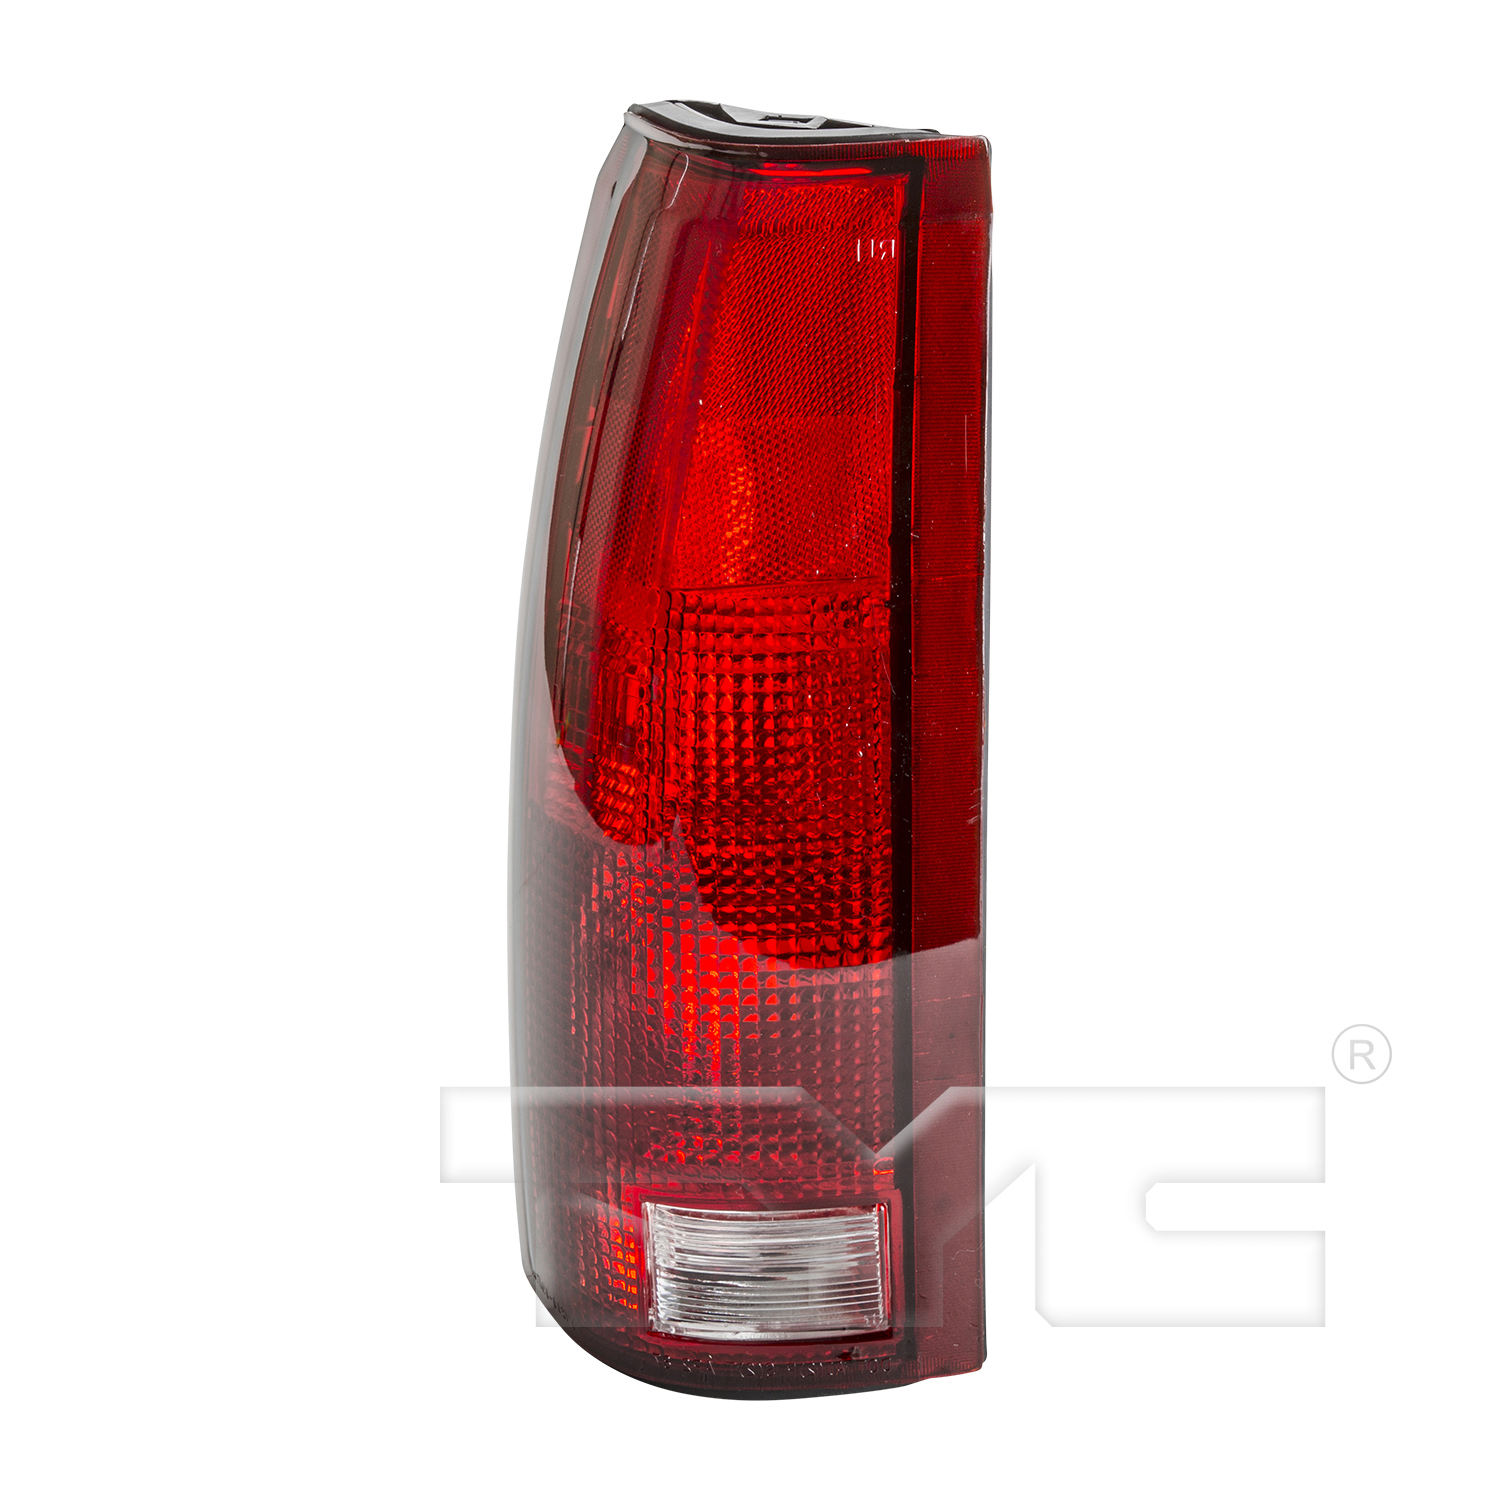 Aftermarket TAILLIGHTS for GMC - C1500, C1500,88-99,LT Taillamp lens